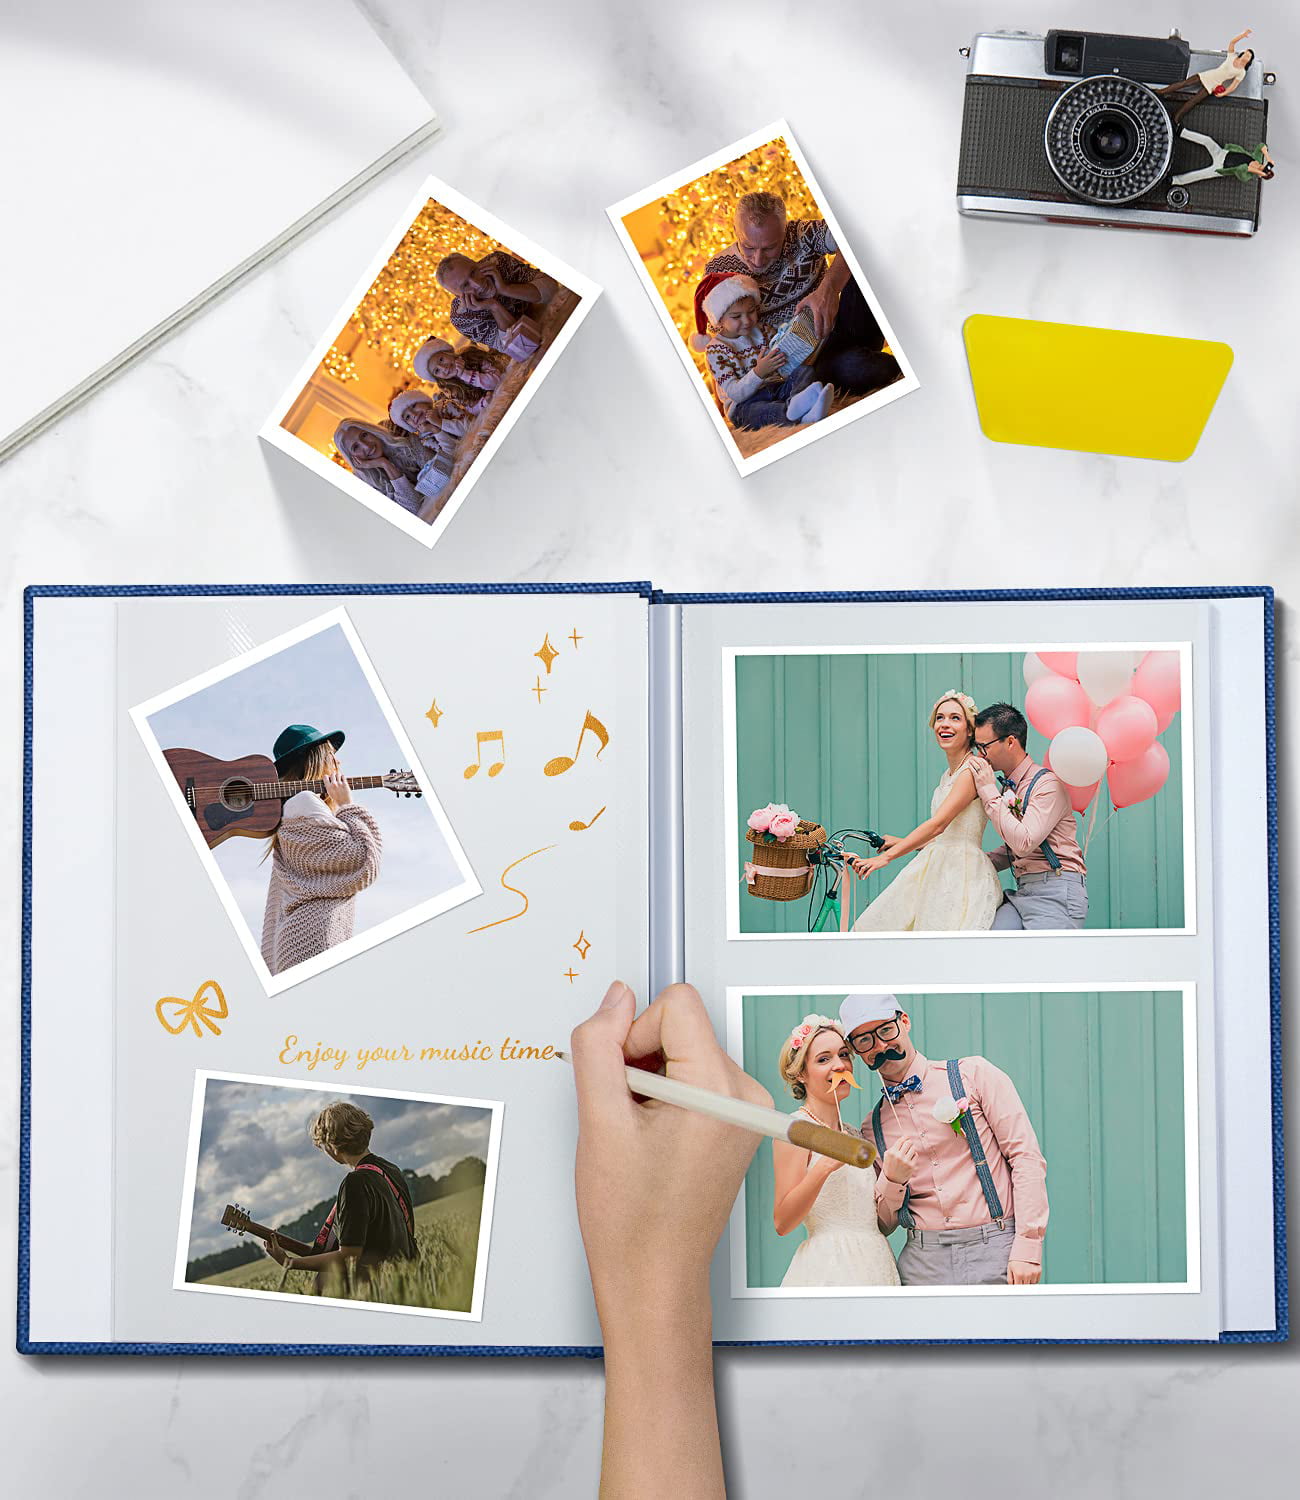 EJBLFE 60 Pages Photo Album Self Adhesive for 4x6 5x7 8x10 Pictures Linen  Scrapbook Album,DIY Memory Book with Metal Pen and Plastic Plate,Ideal Gift  Choices for Family Wedding Friends and Baby 